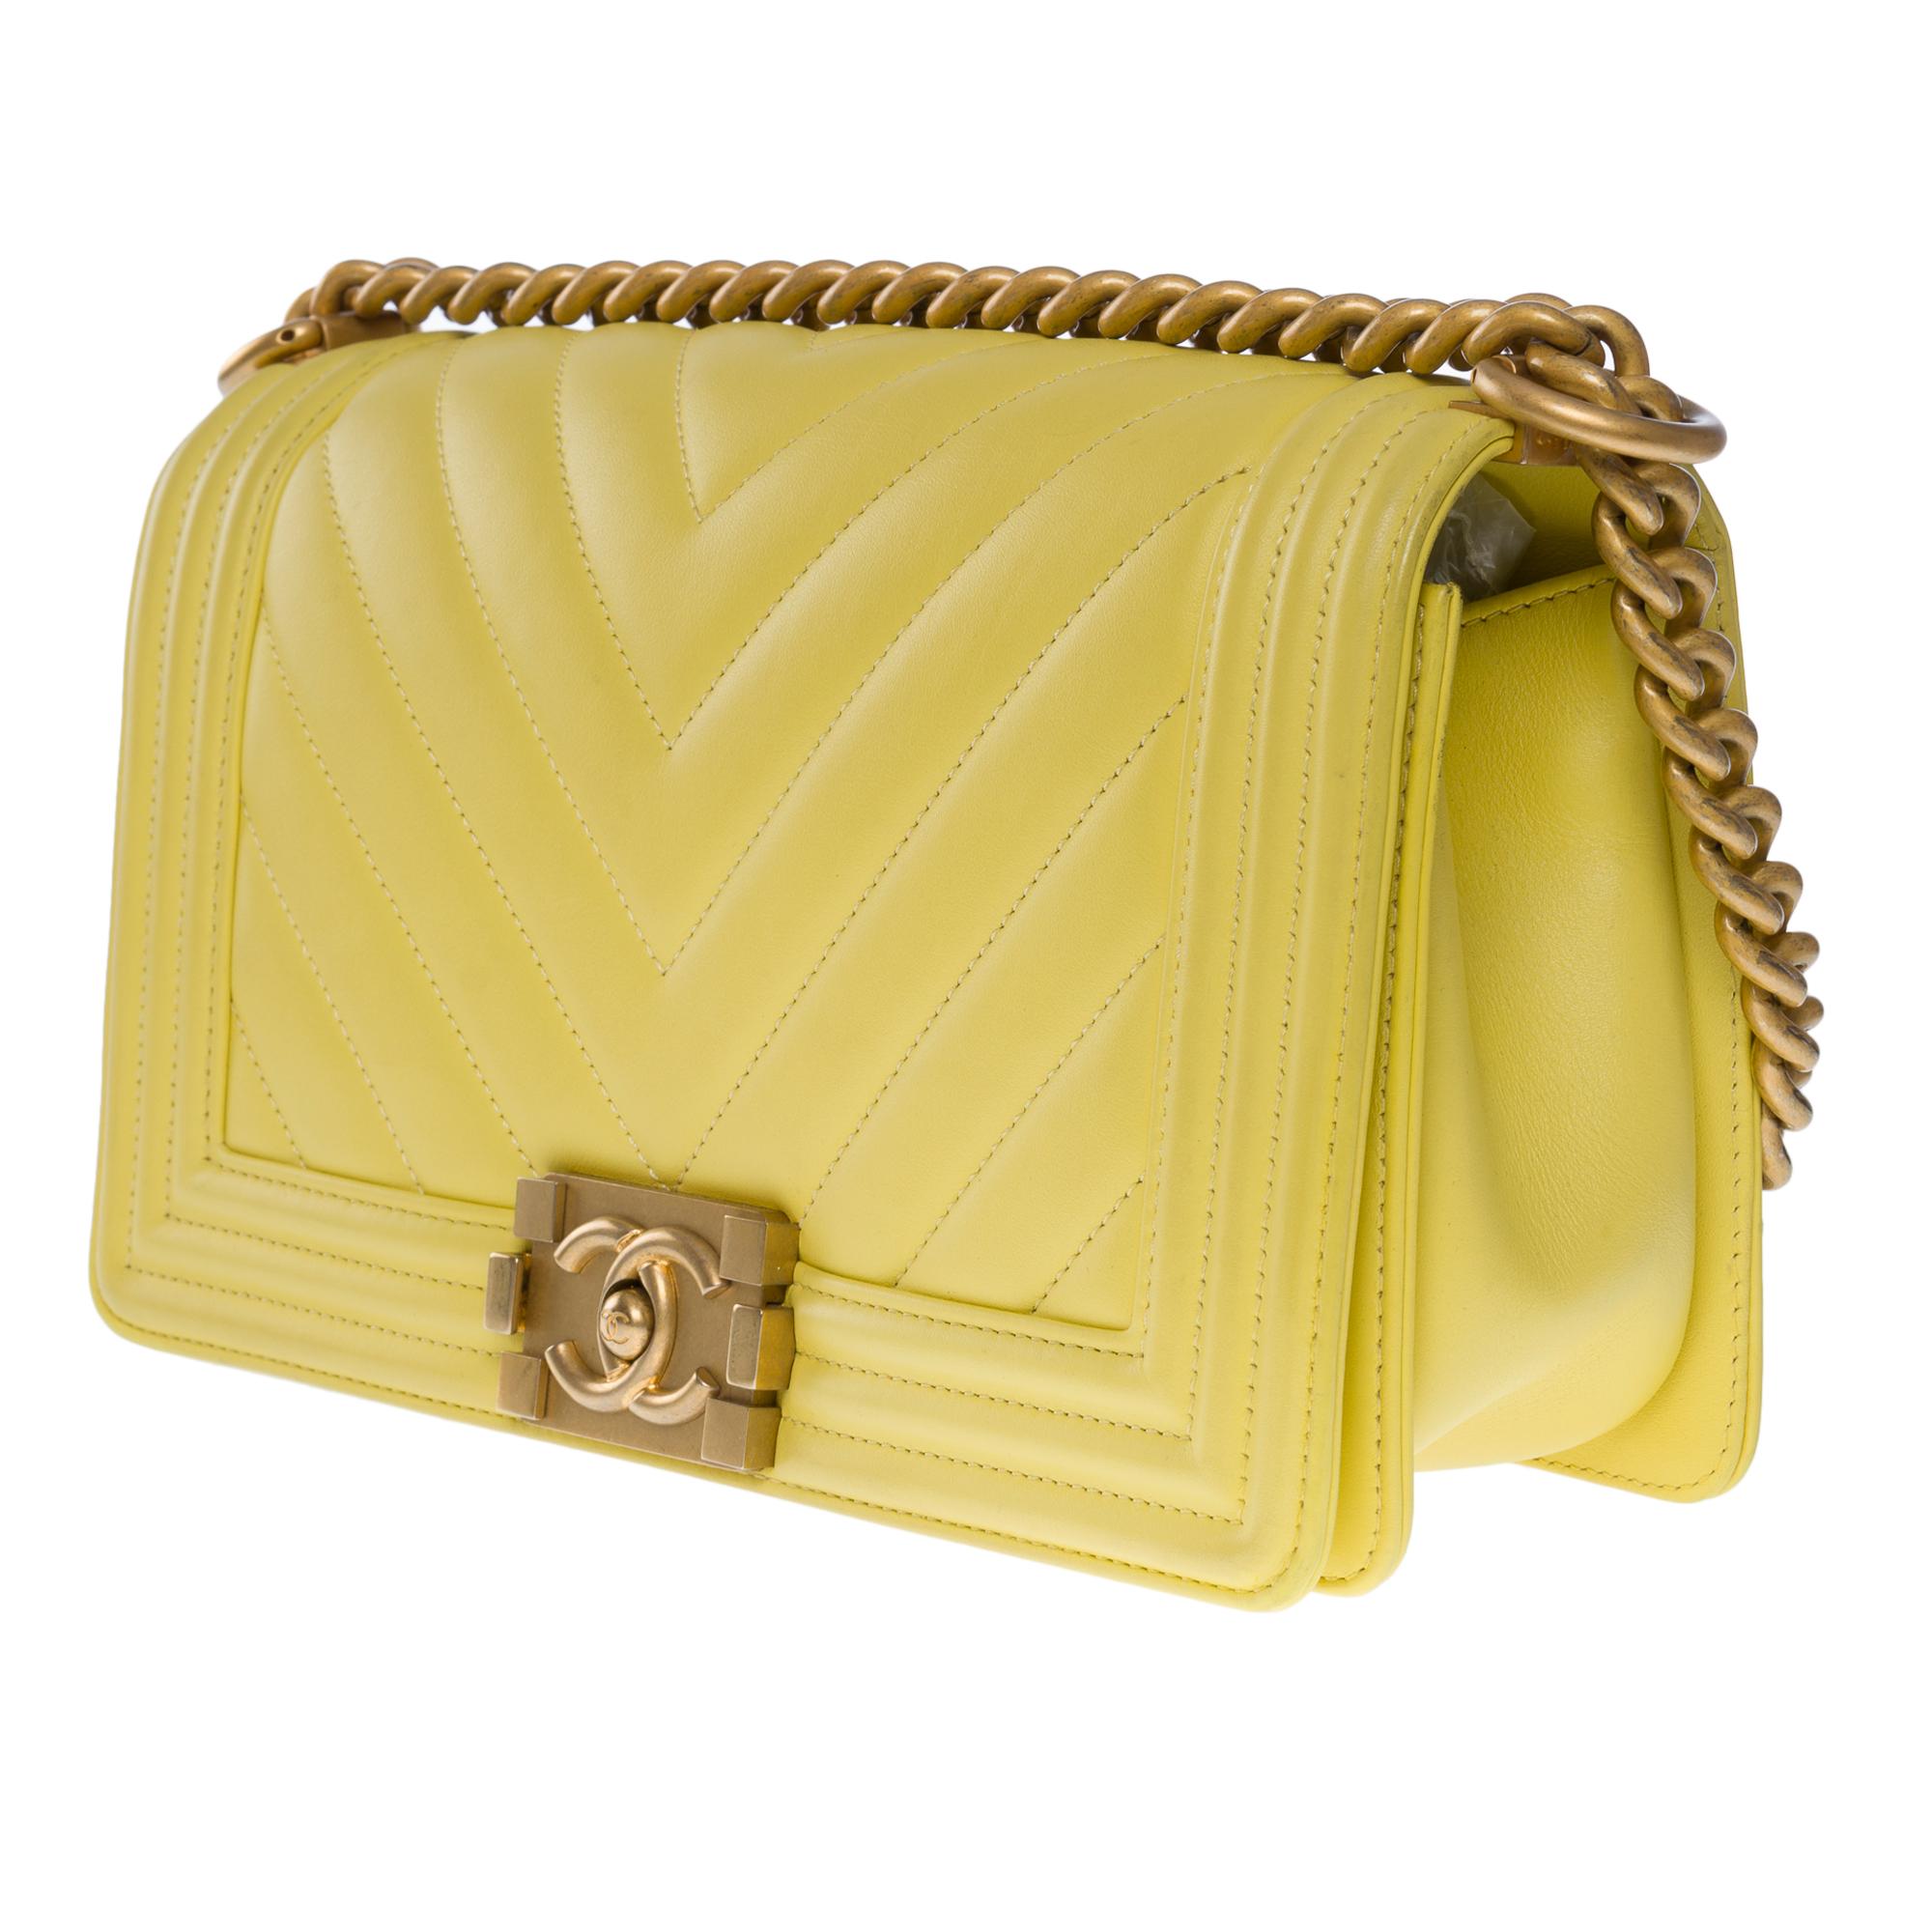 Women's Chanel Boy Old Medium shoulder bag in Yellow quilted herringbone leather, MGHW For Sale